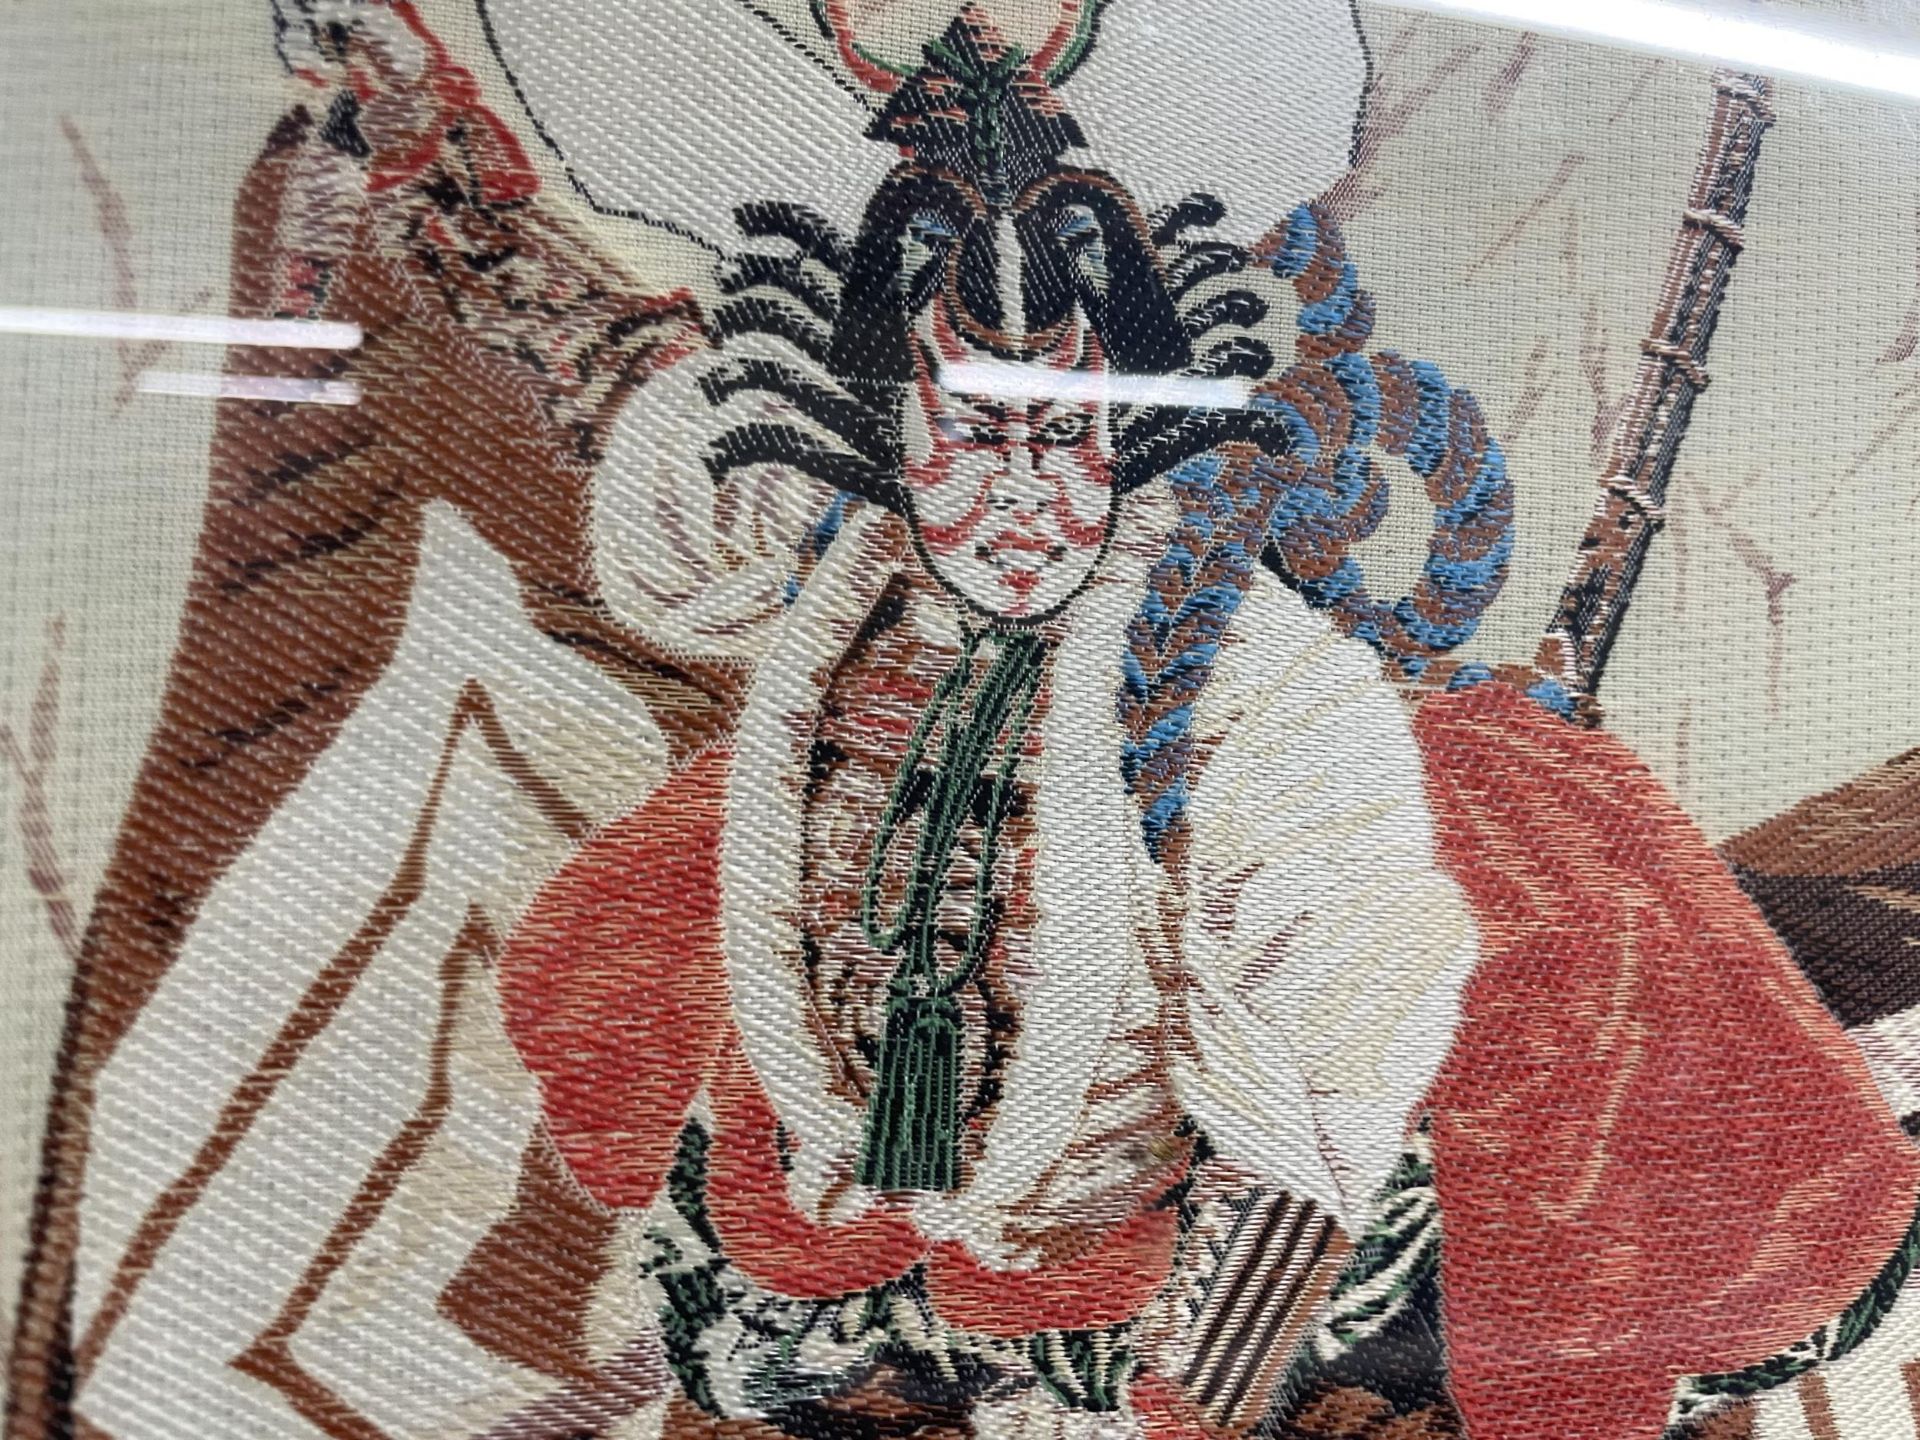 A FRAMED PANEL OF AN ORIENTAL WARRIOR - Image 2 of 3